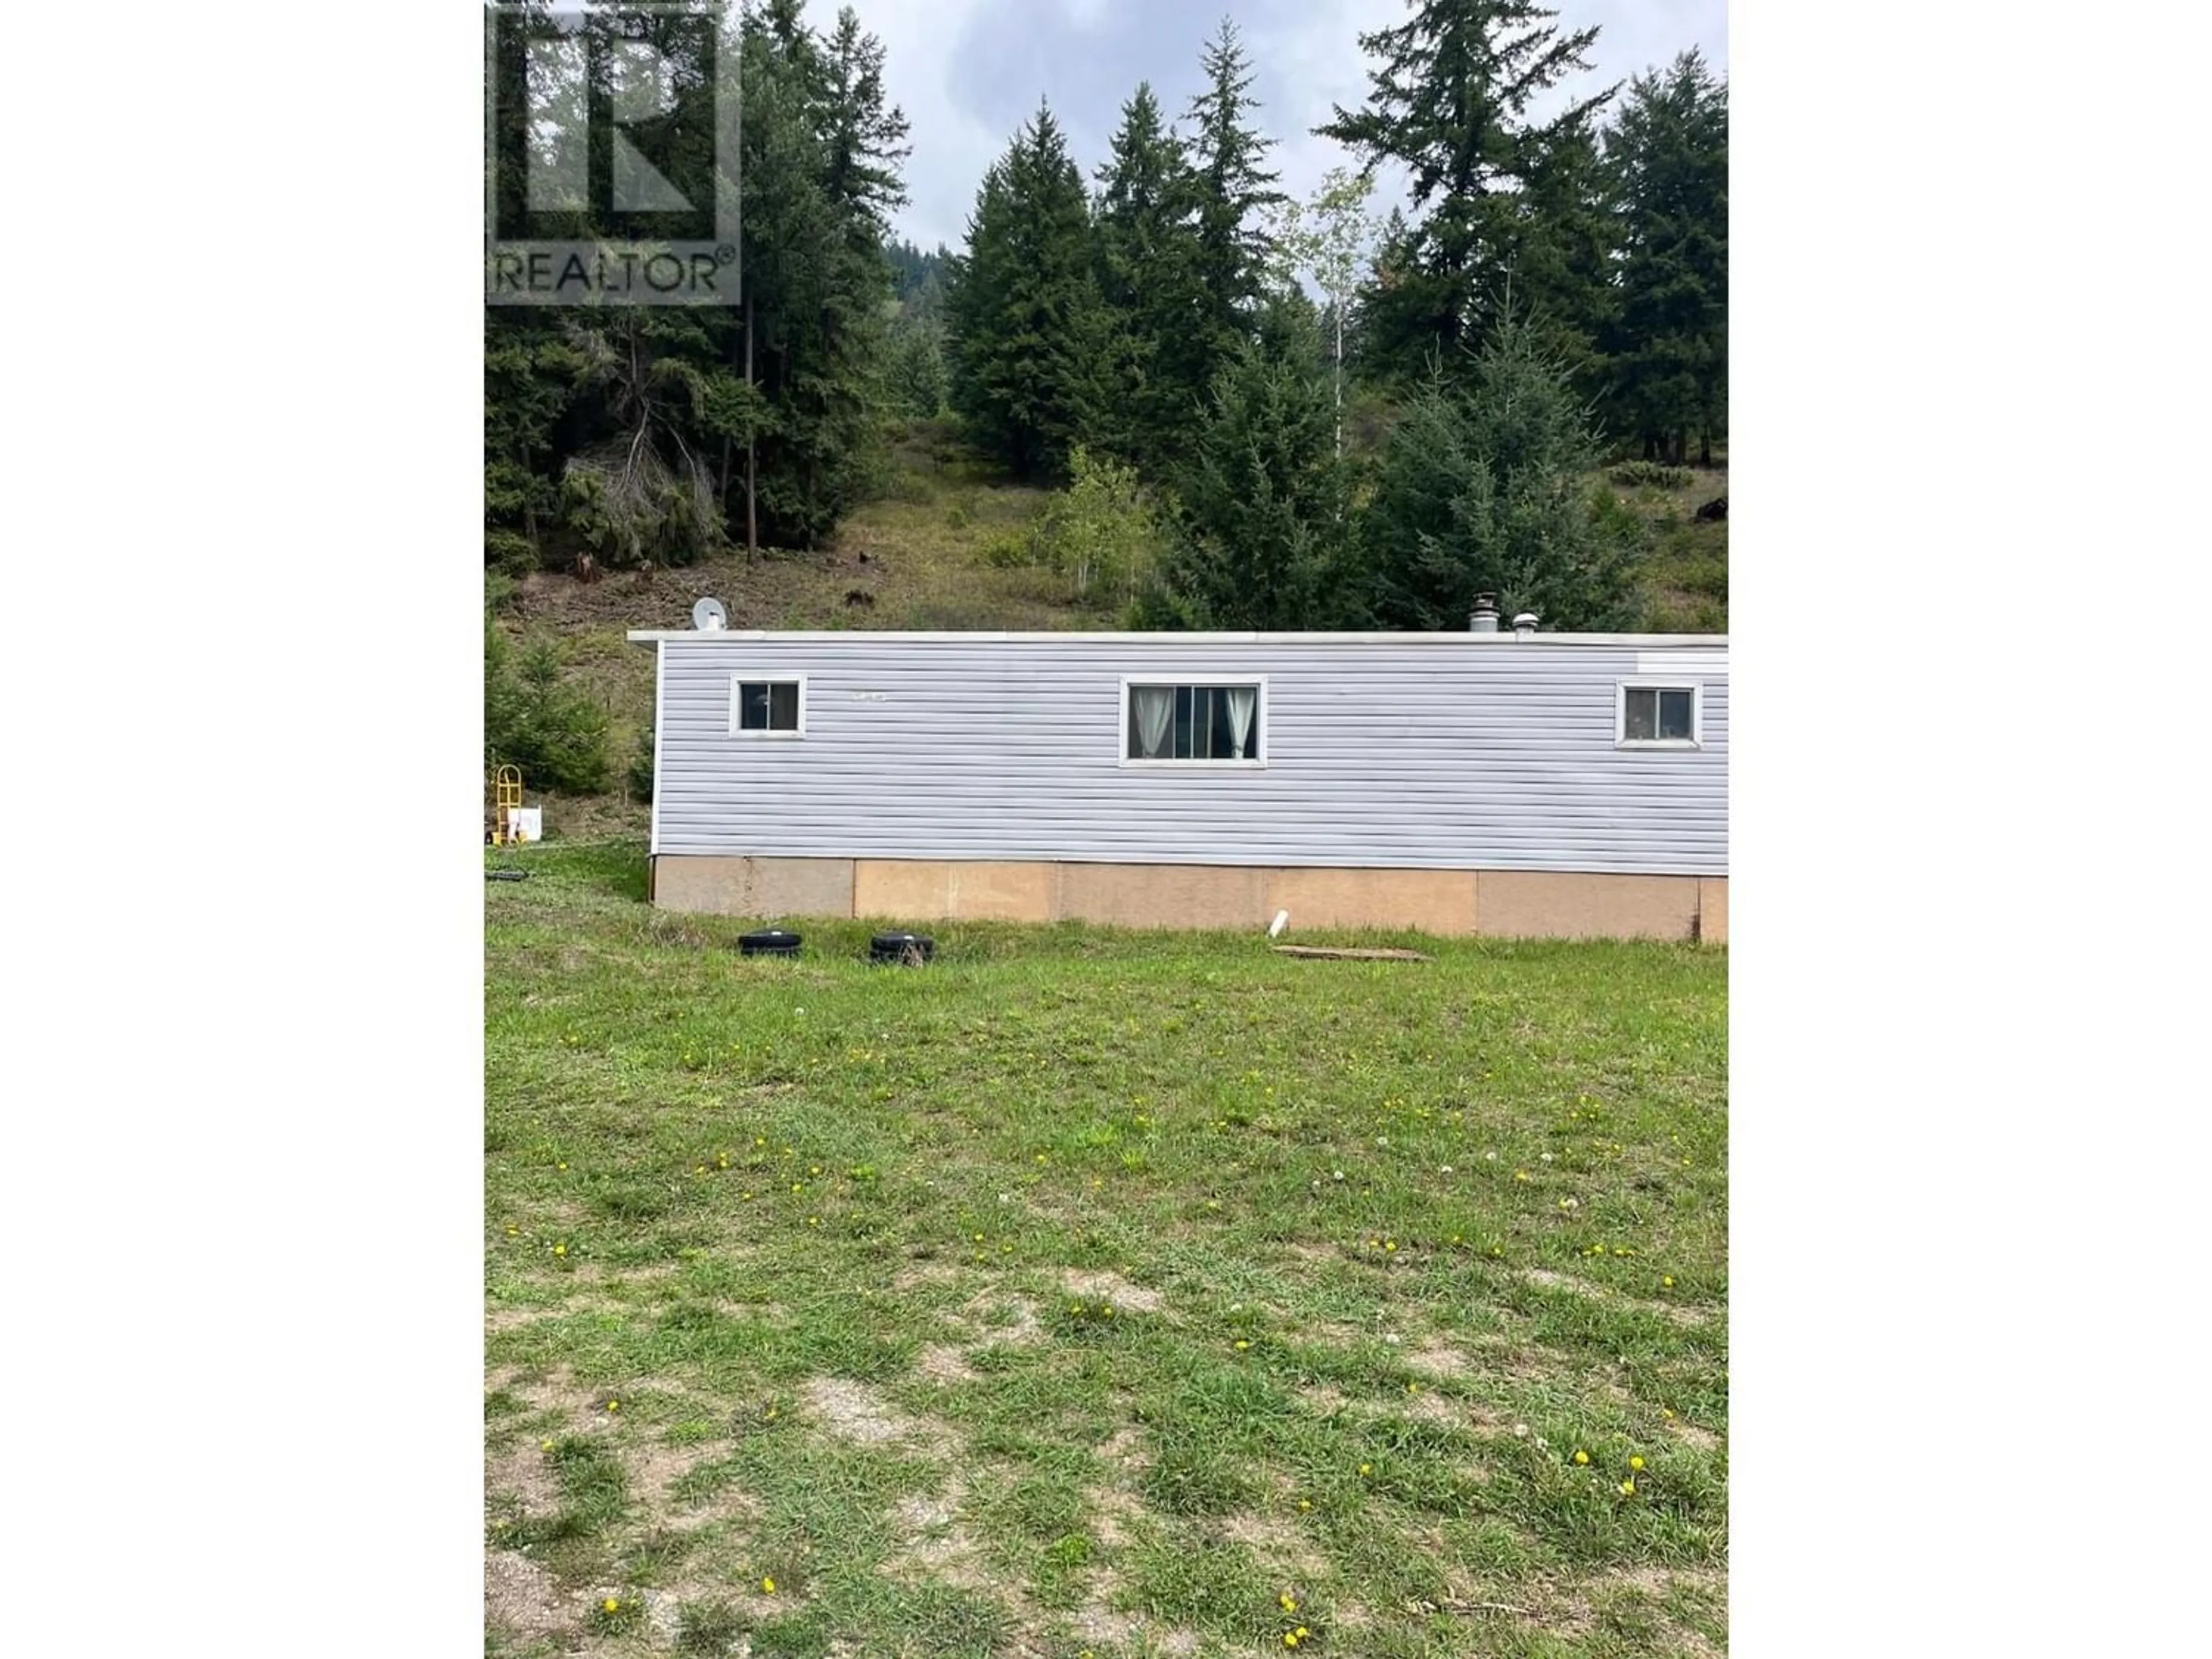 Frontside or backside of a home for 2019 YELLOWHEAD HIGHWAY, Clearwater British Columbia V0E1N1